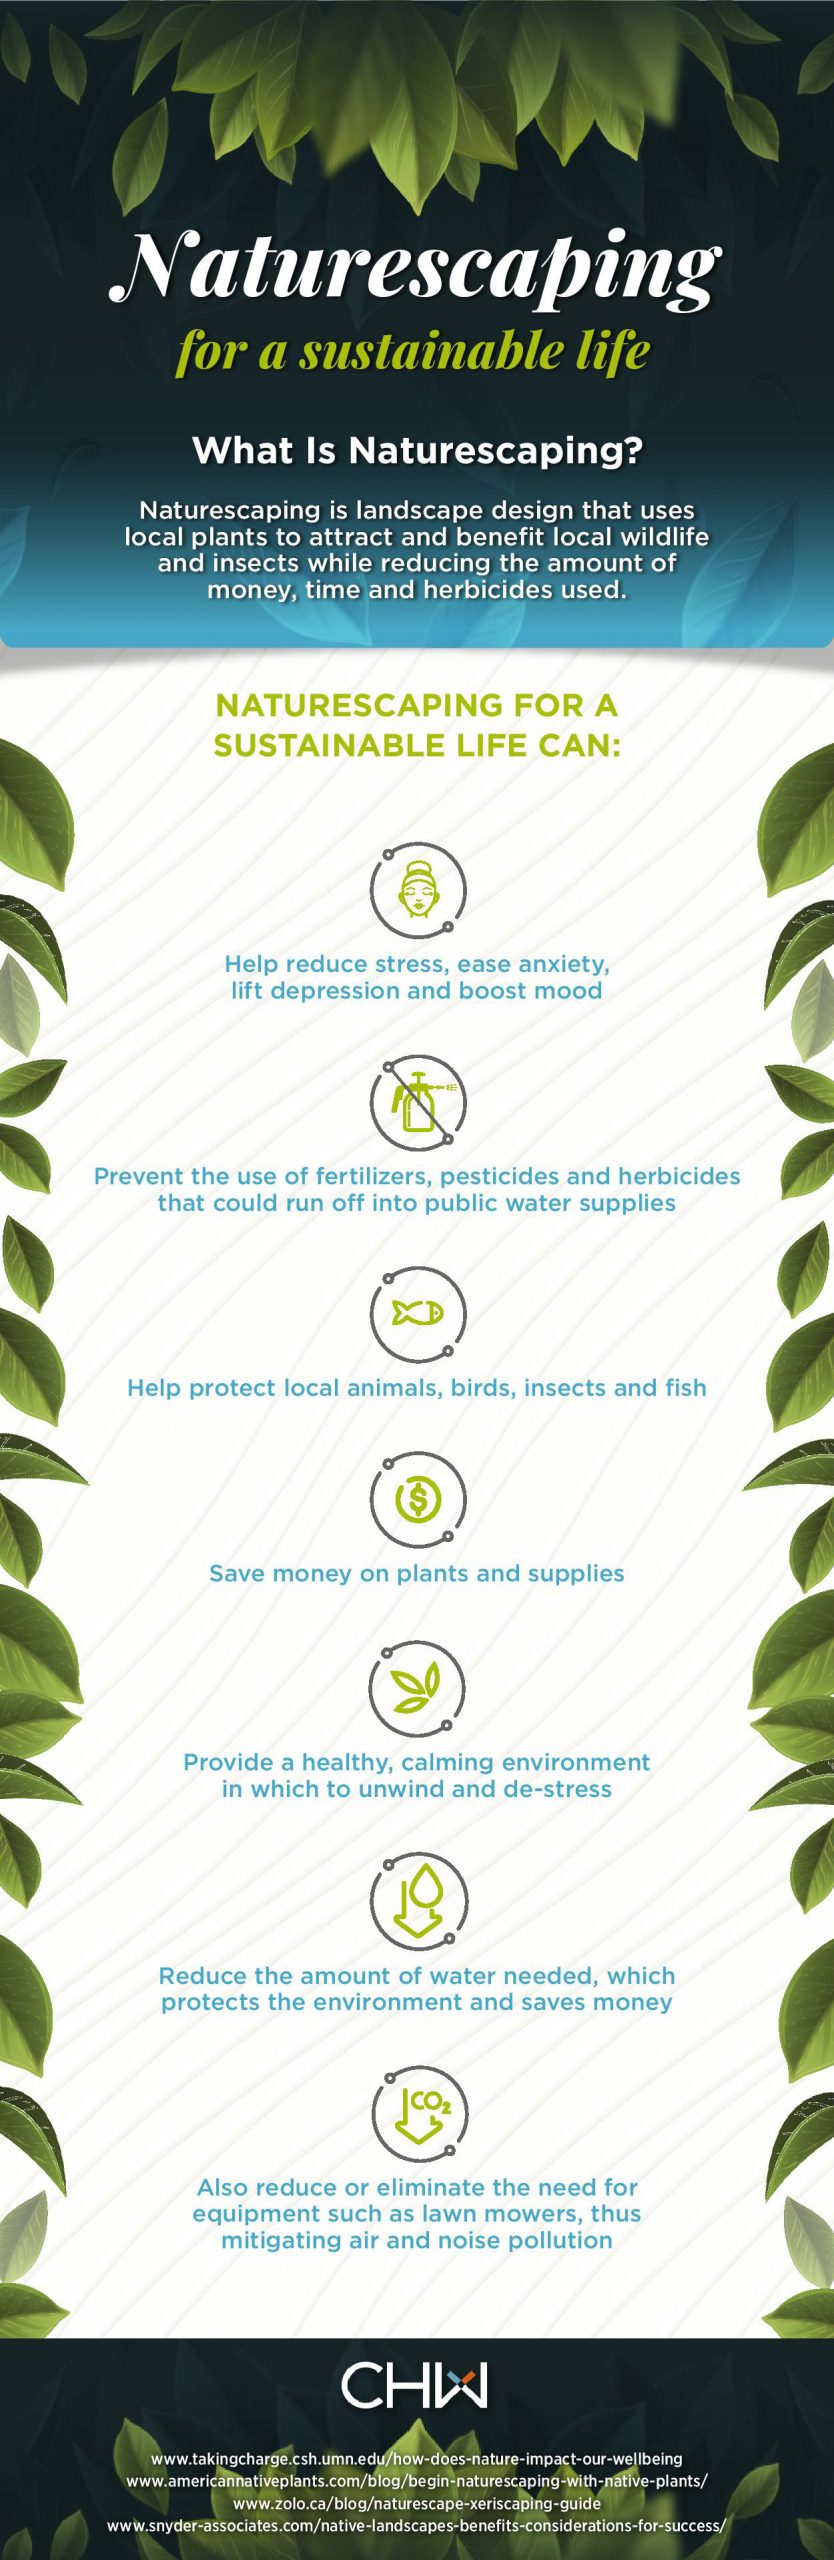 chw naturingscaping for a sustainable life infographic